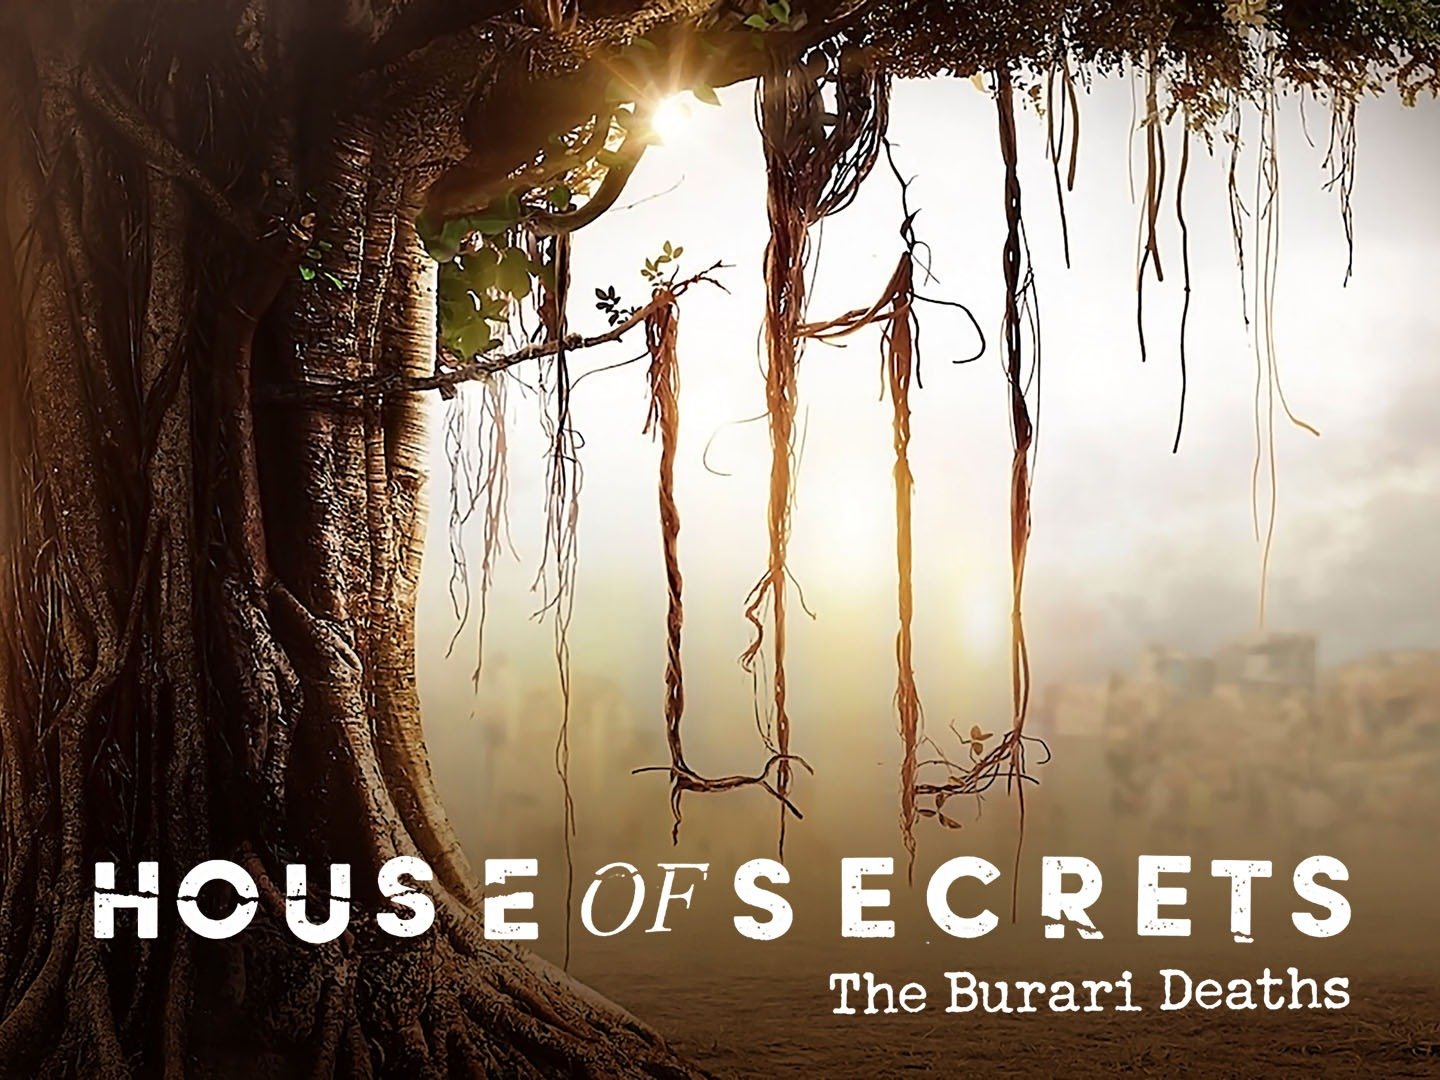 House of Secrets: The Burari Deaths - Rotten Tomatoes